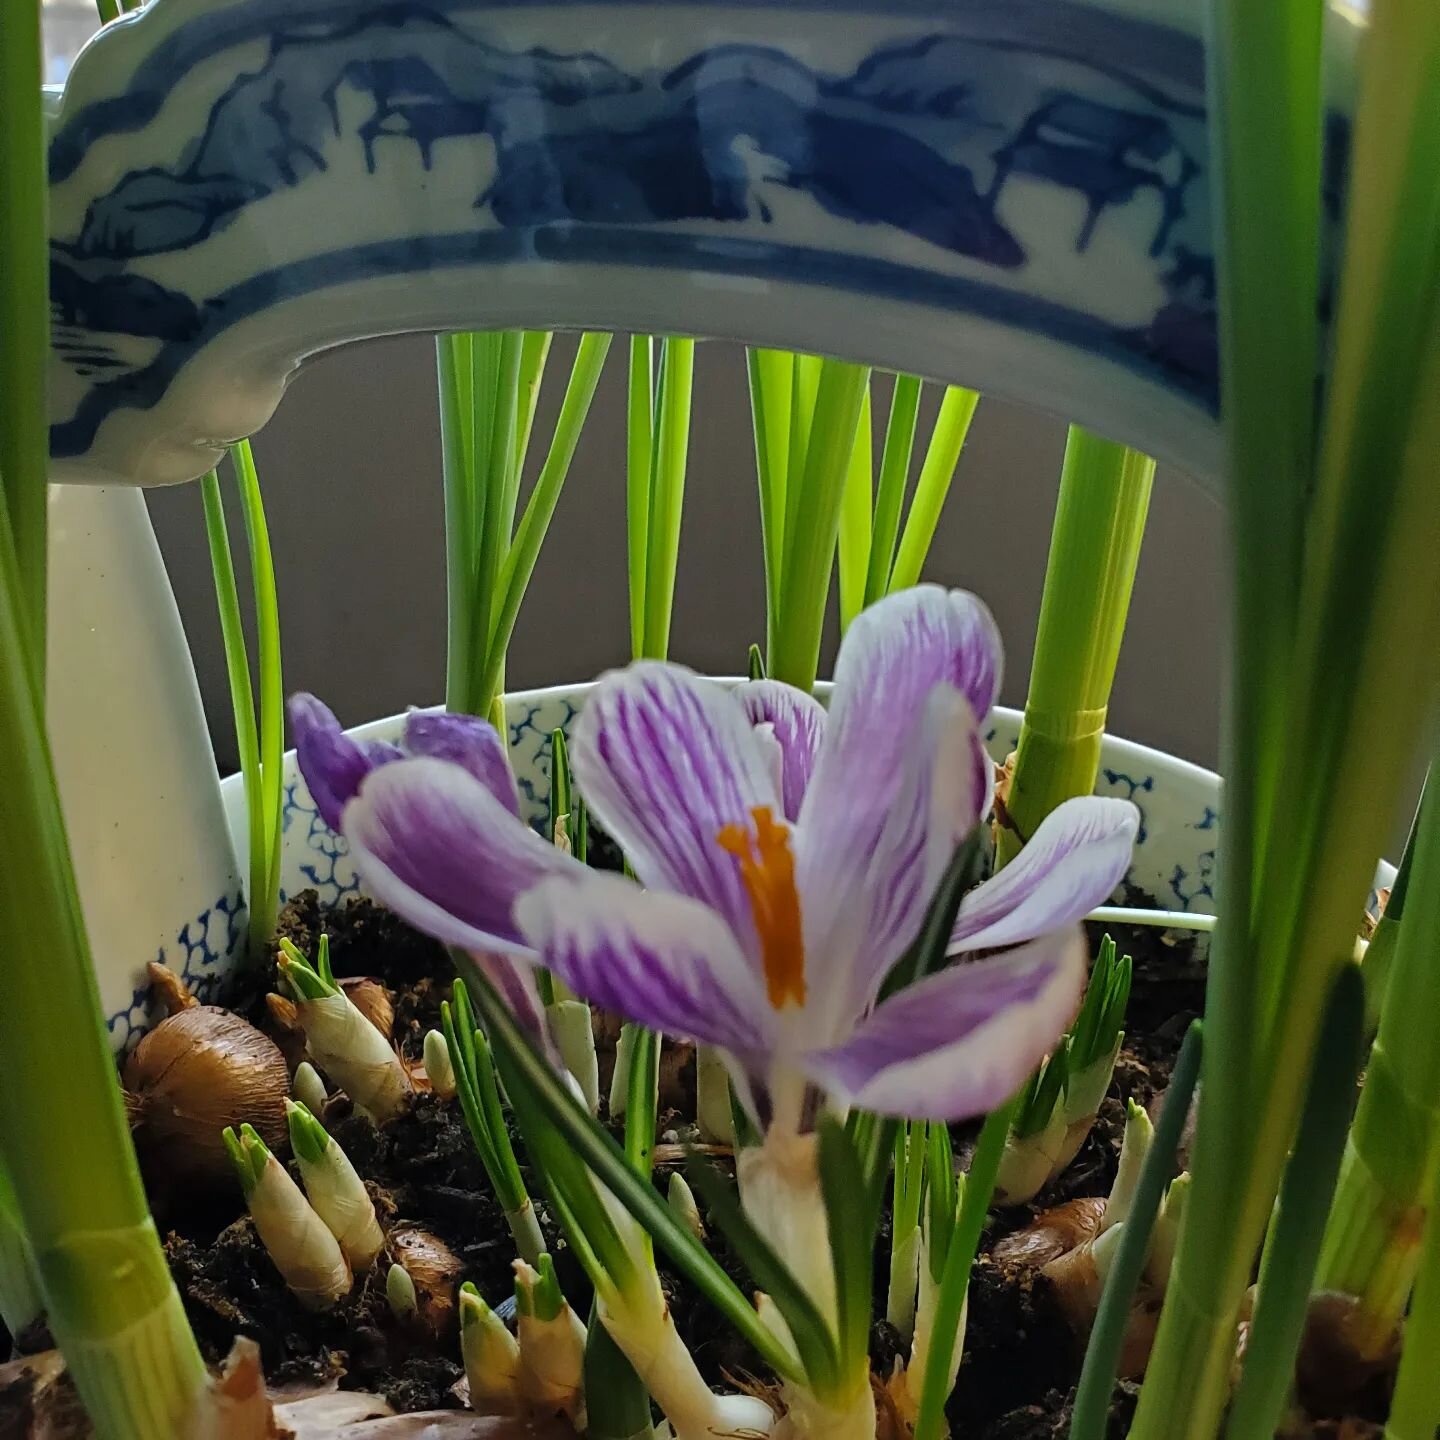 #Crocus blooming in my #blueandwhitechina planter... it's chilly outside but spring in my sitting room. #garden #bulb #springplanters #donnadavisartbythesea